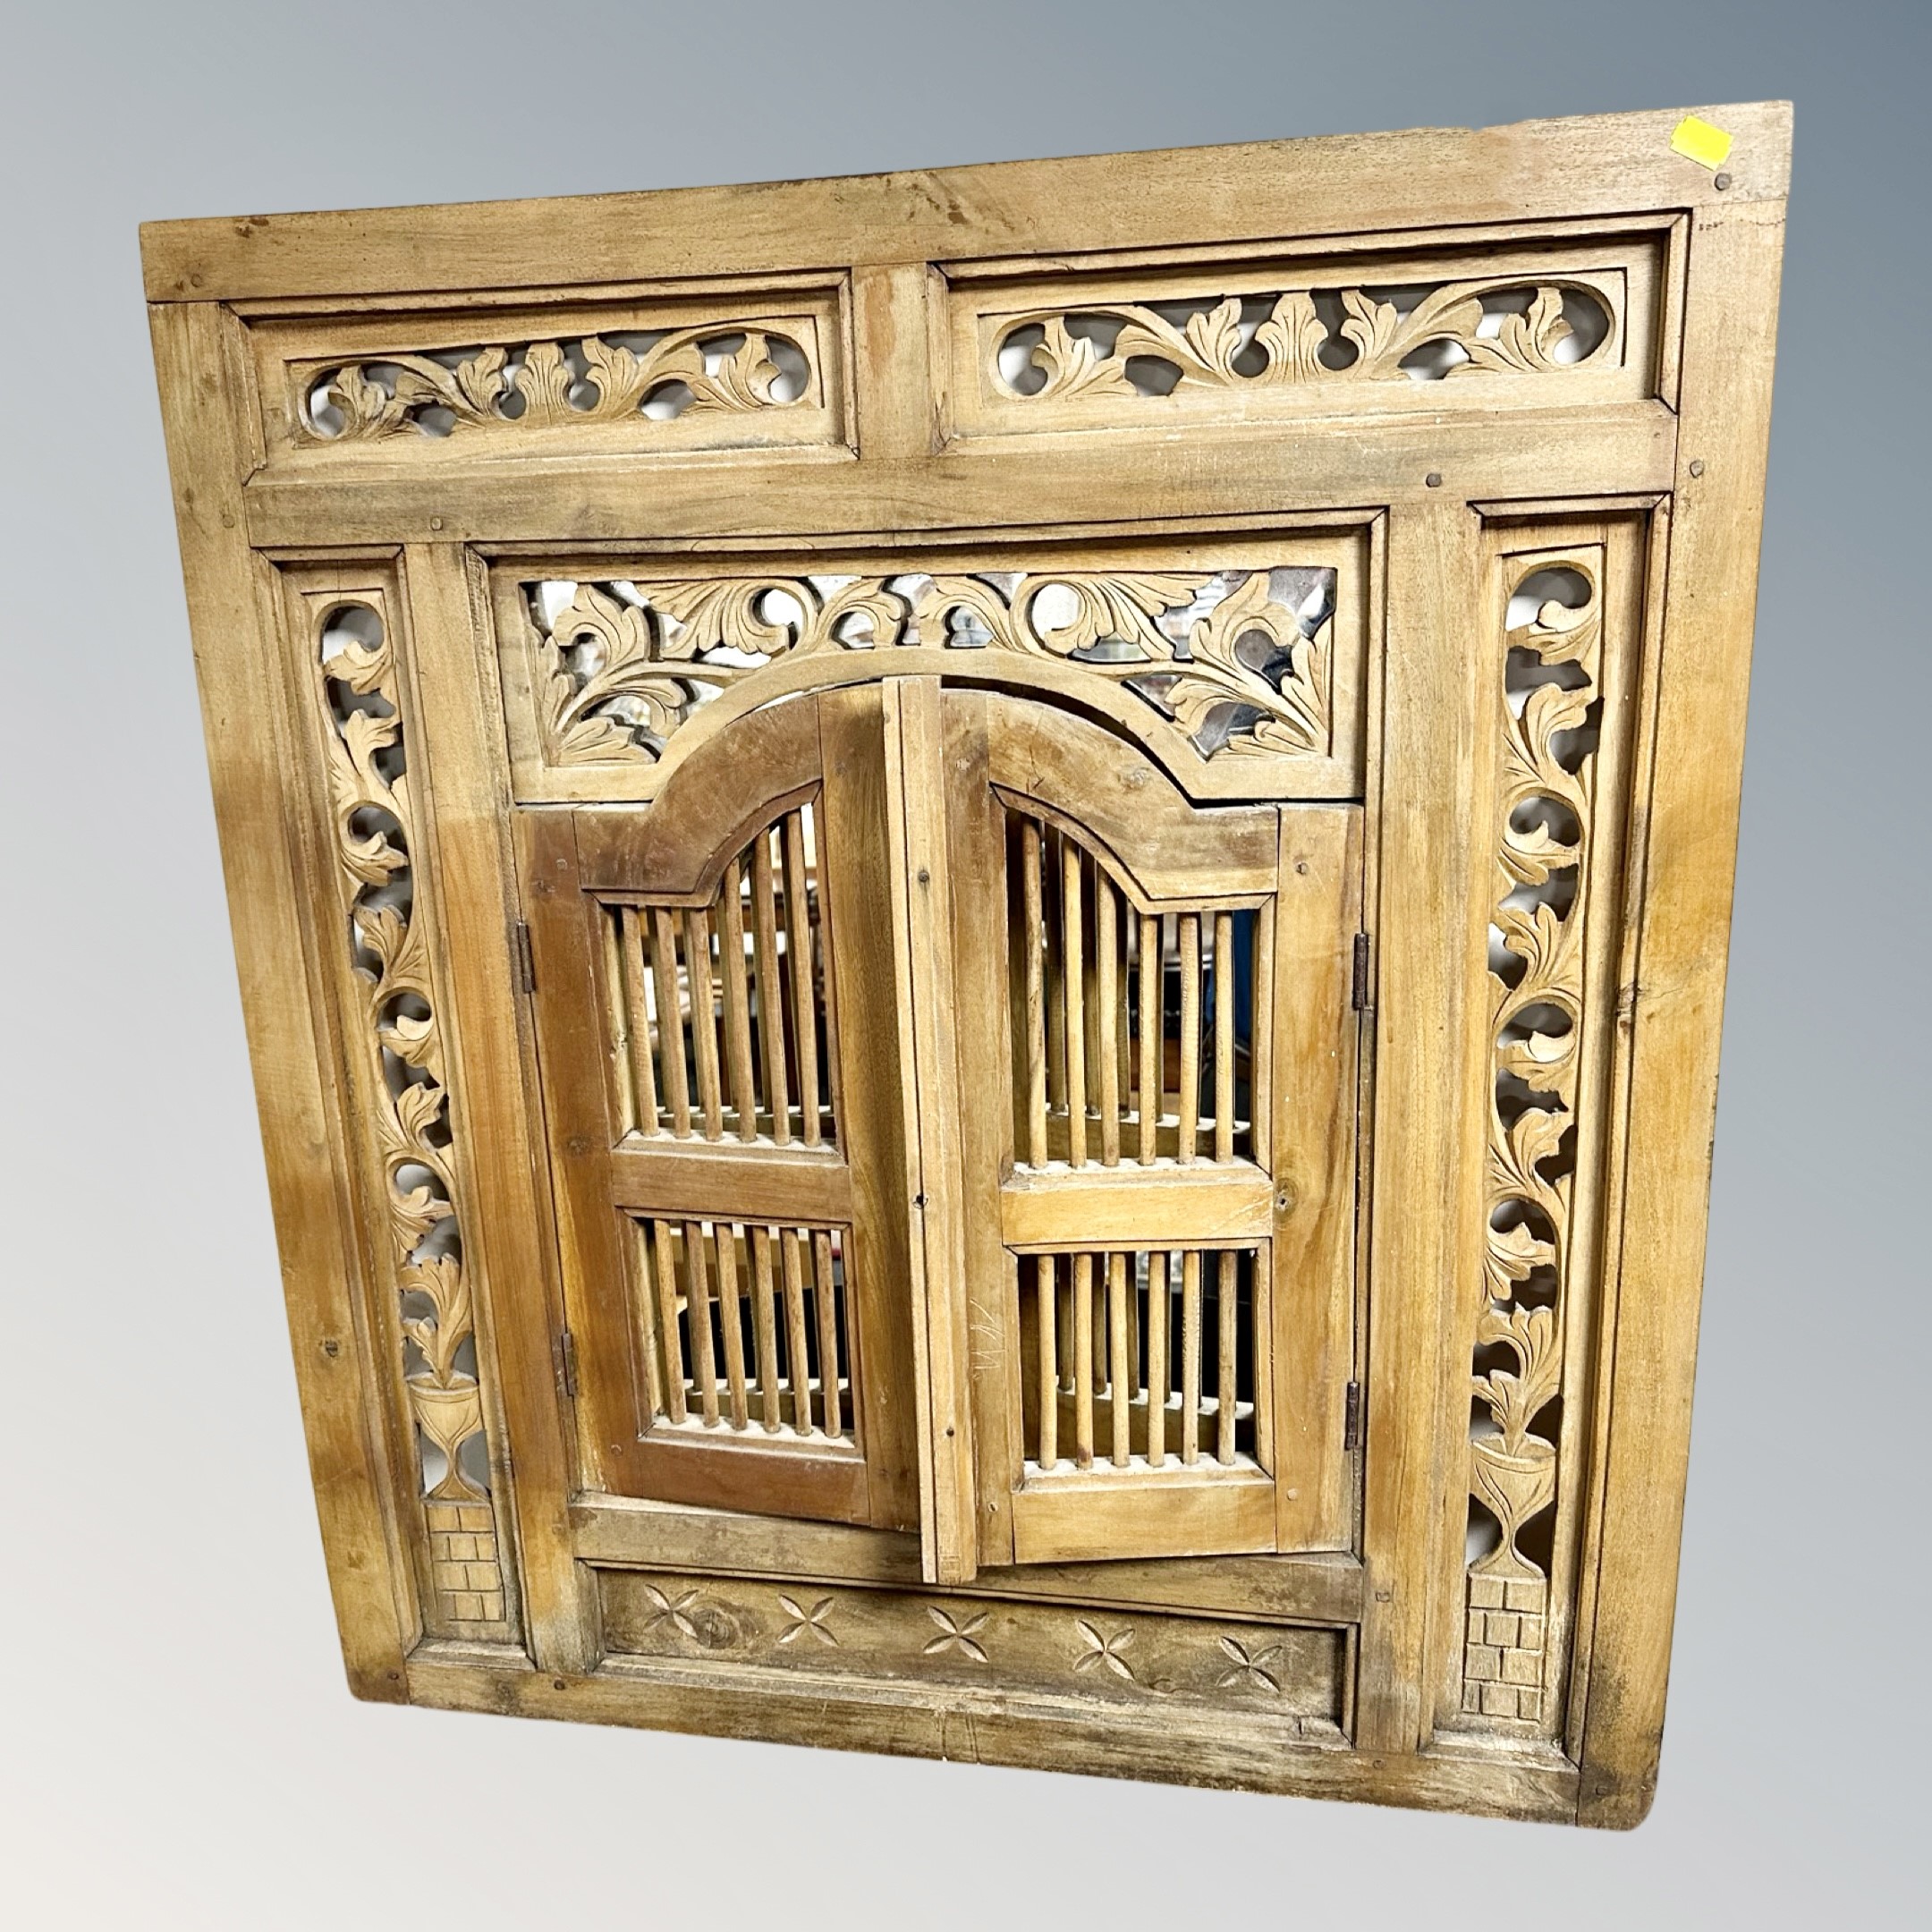 A carved Eastern mirror with shutter doors, - Image 2 of 2